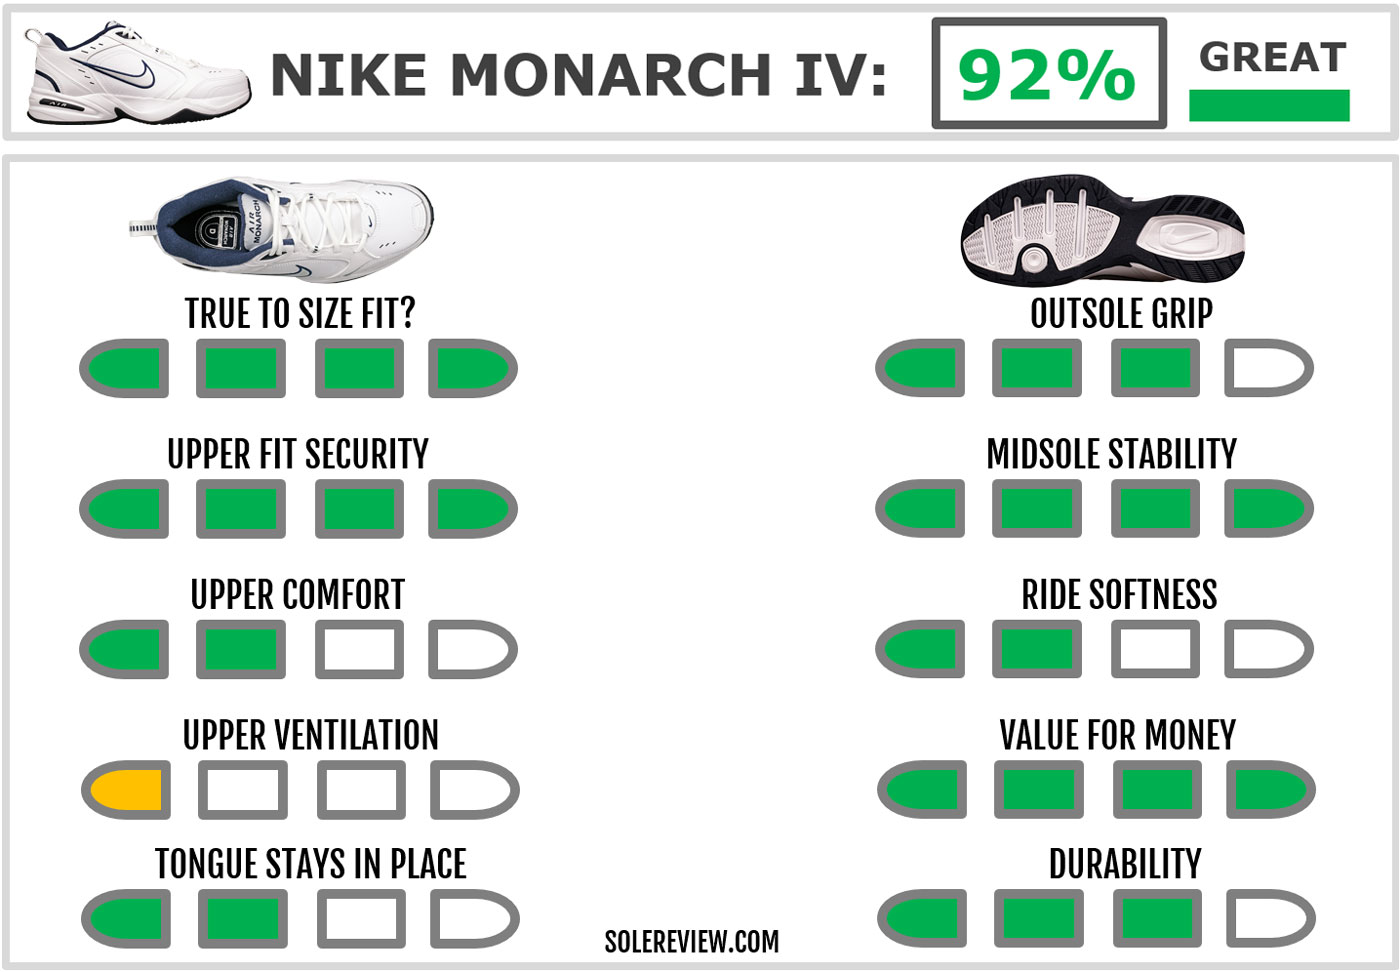 The overall rating of the Nike Monarch IV.